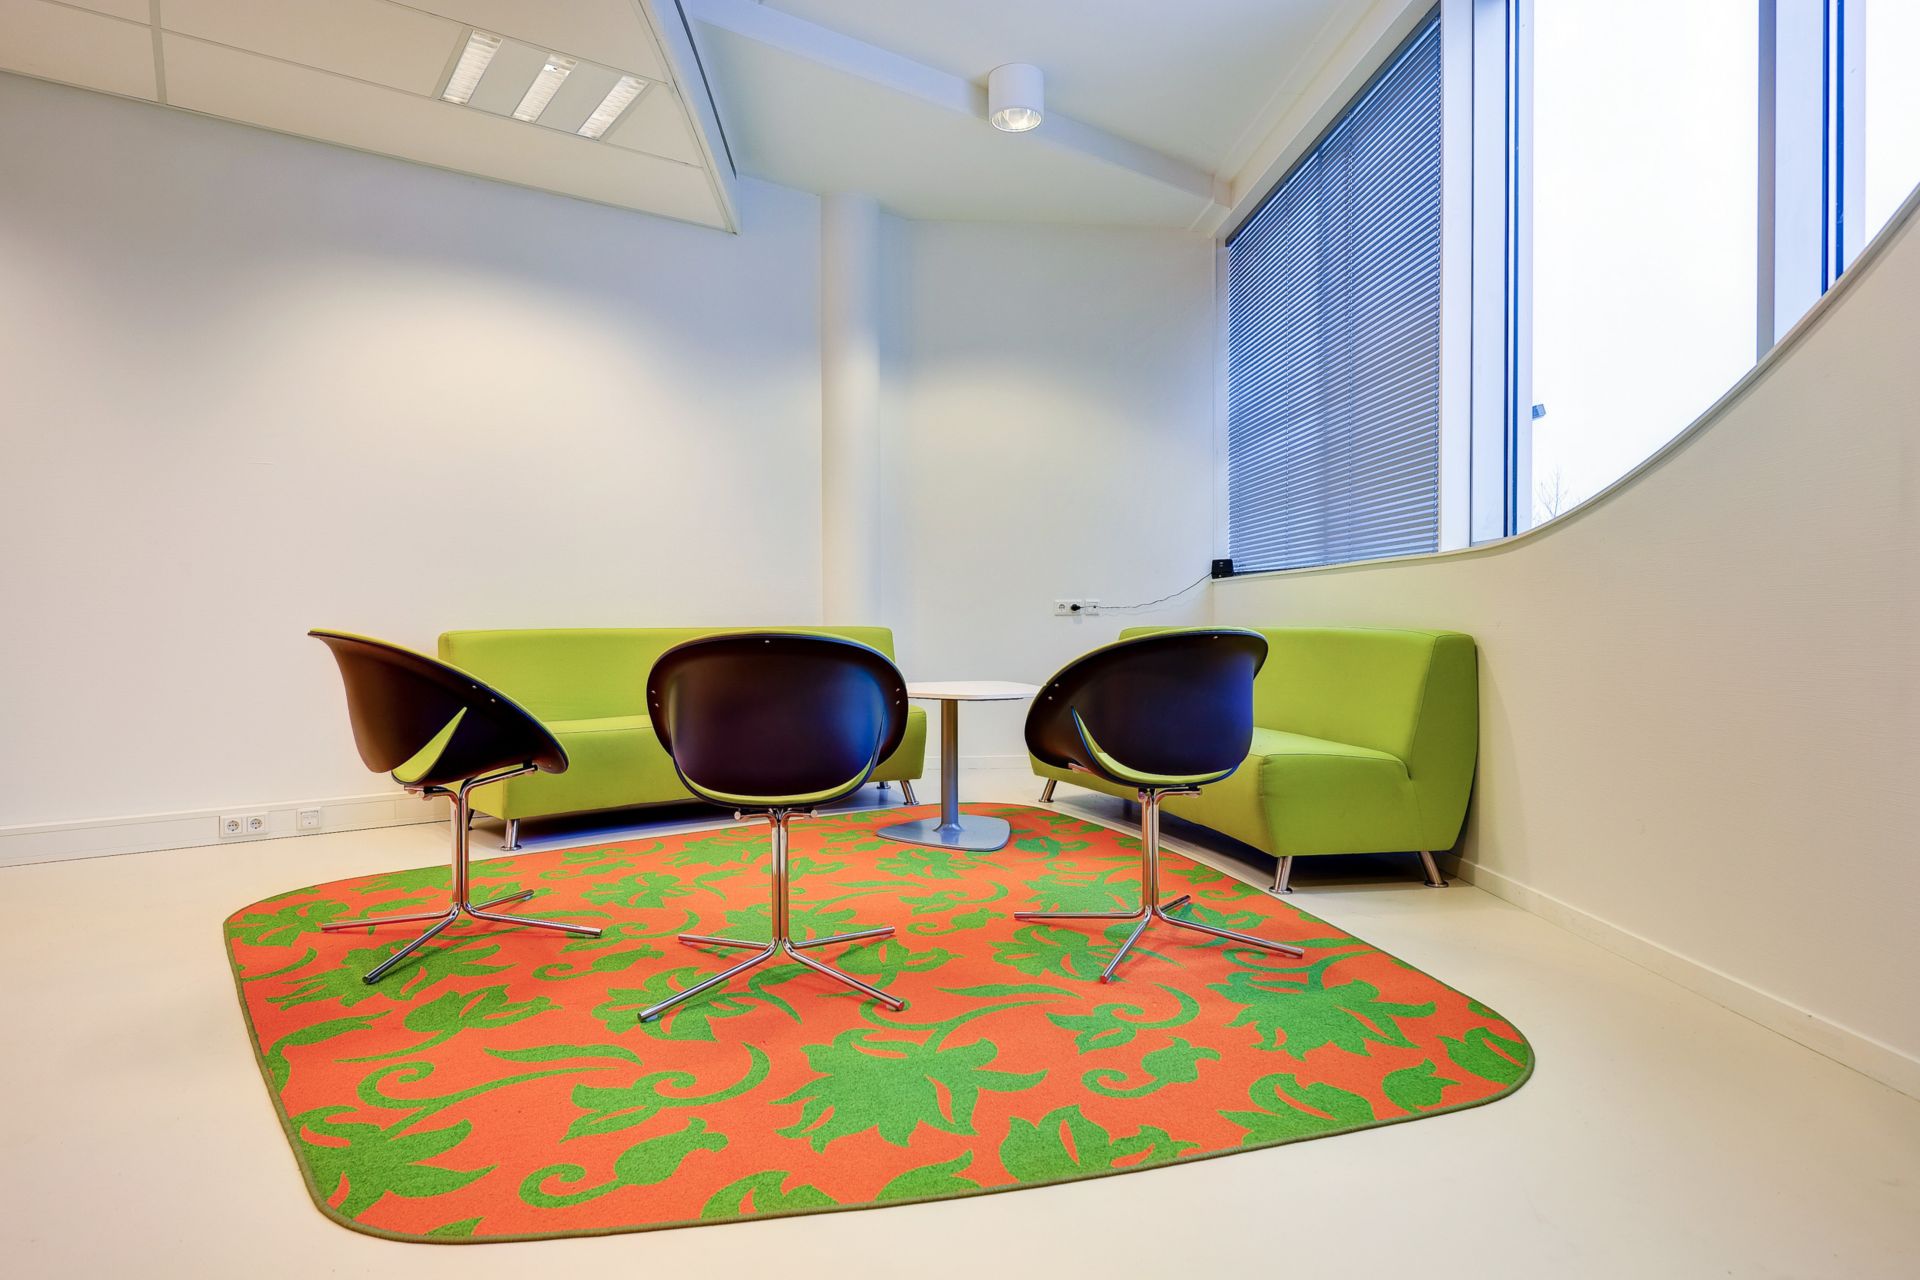 Sika ComfortFloor® white floor in seating area with colorful rug